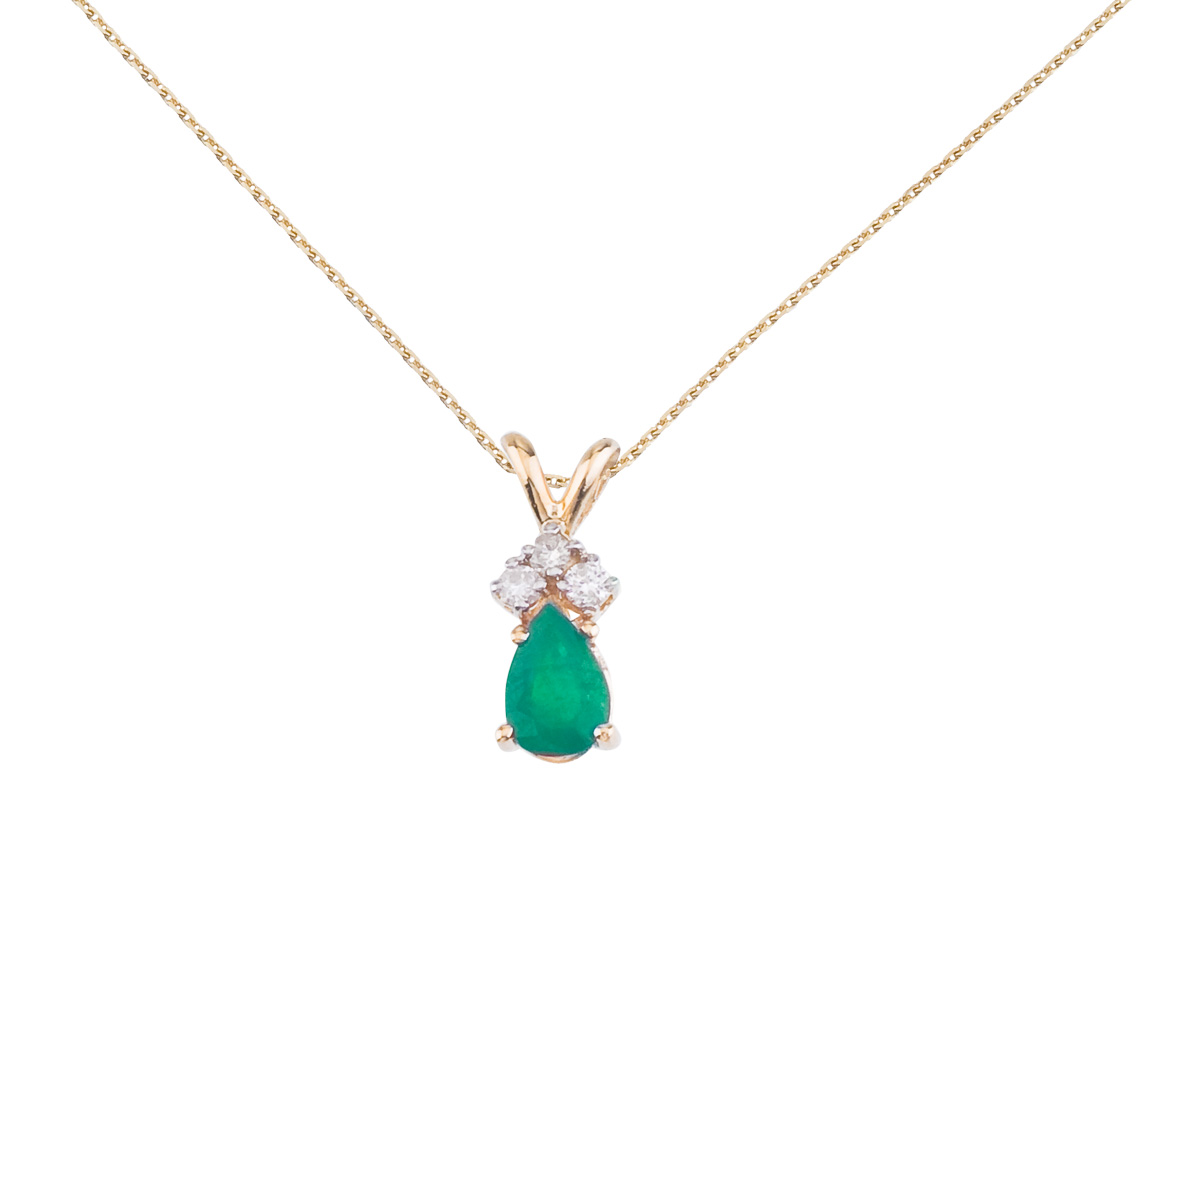 DIRECT-JEWELRY DON'T FORGET THE DASH 14K Yellow Gold Pear Shaped Emerald Pendant with Diamonds and 18" Chain